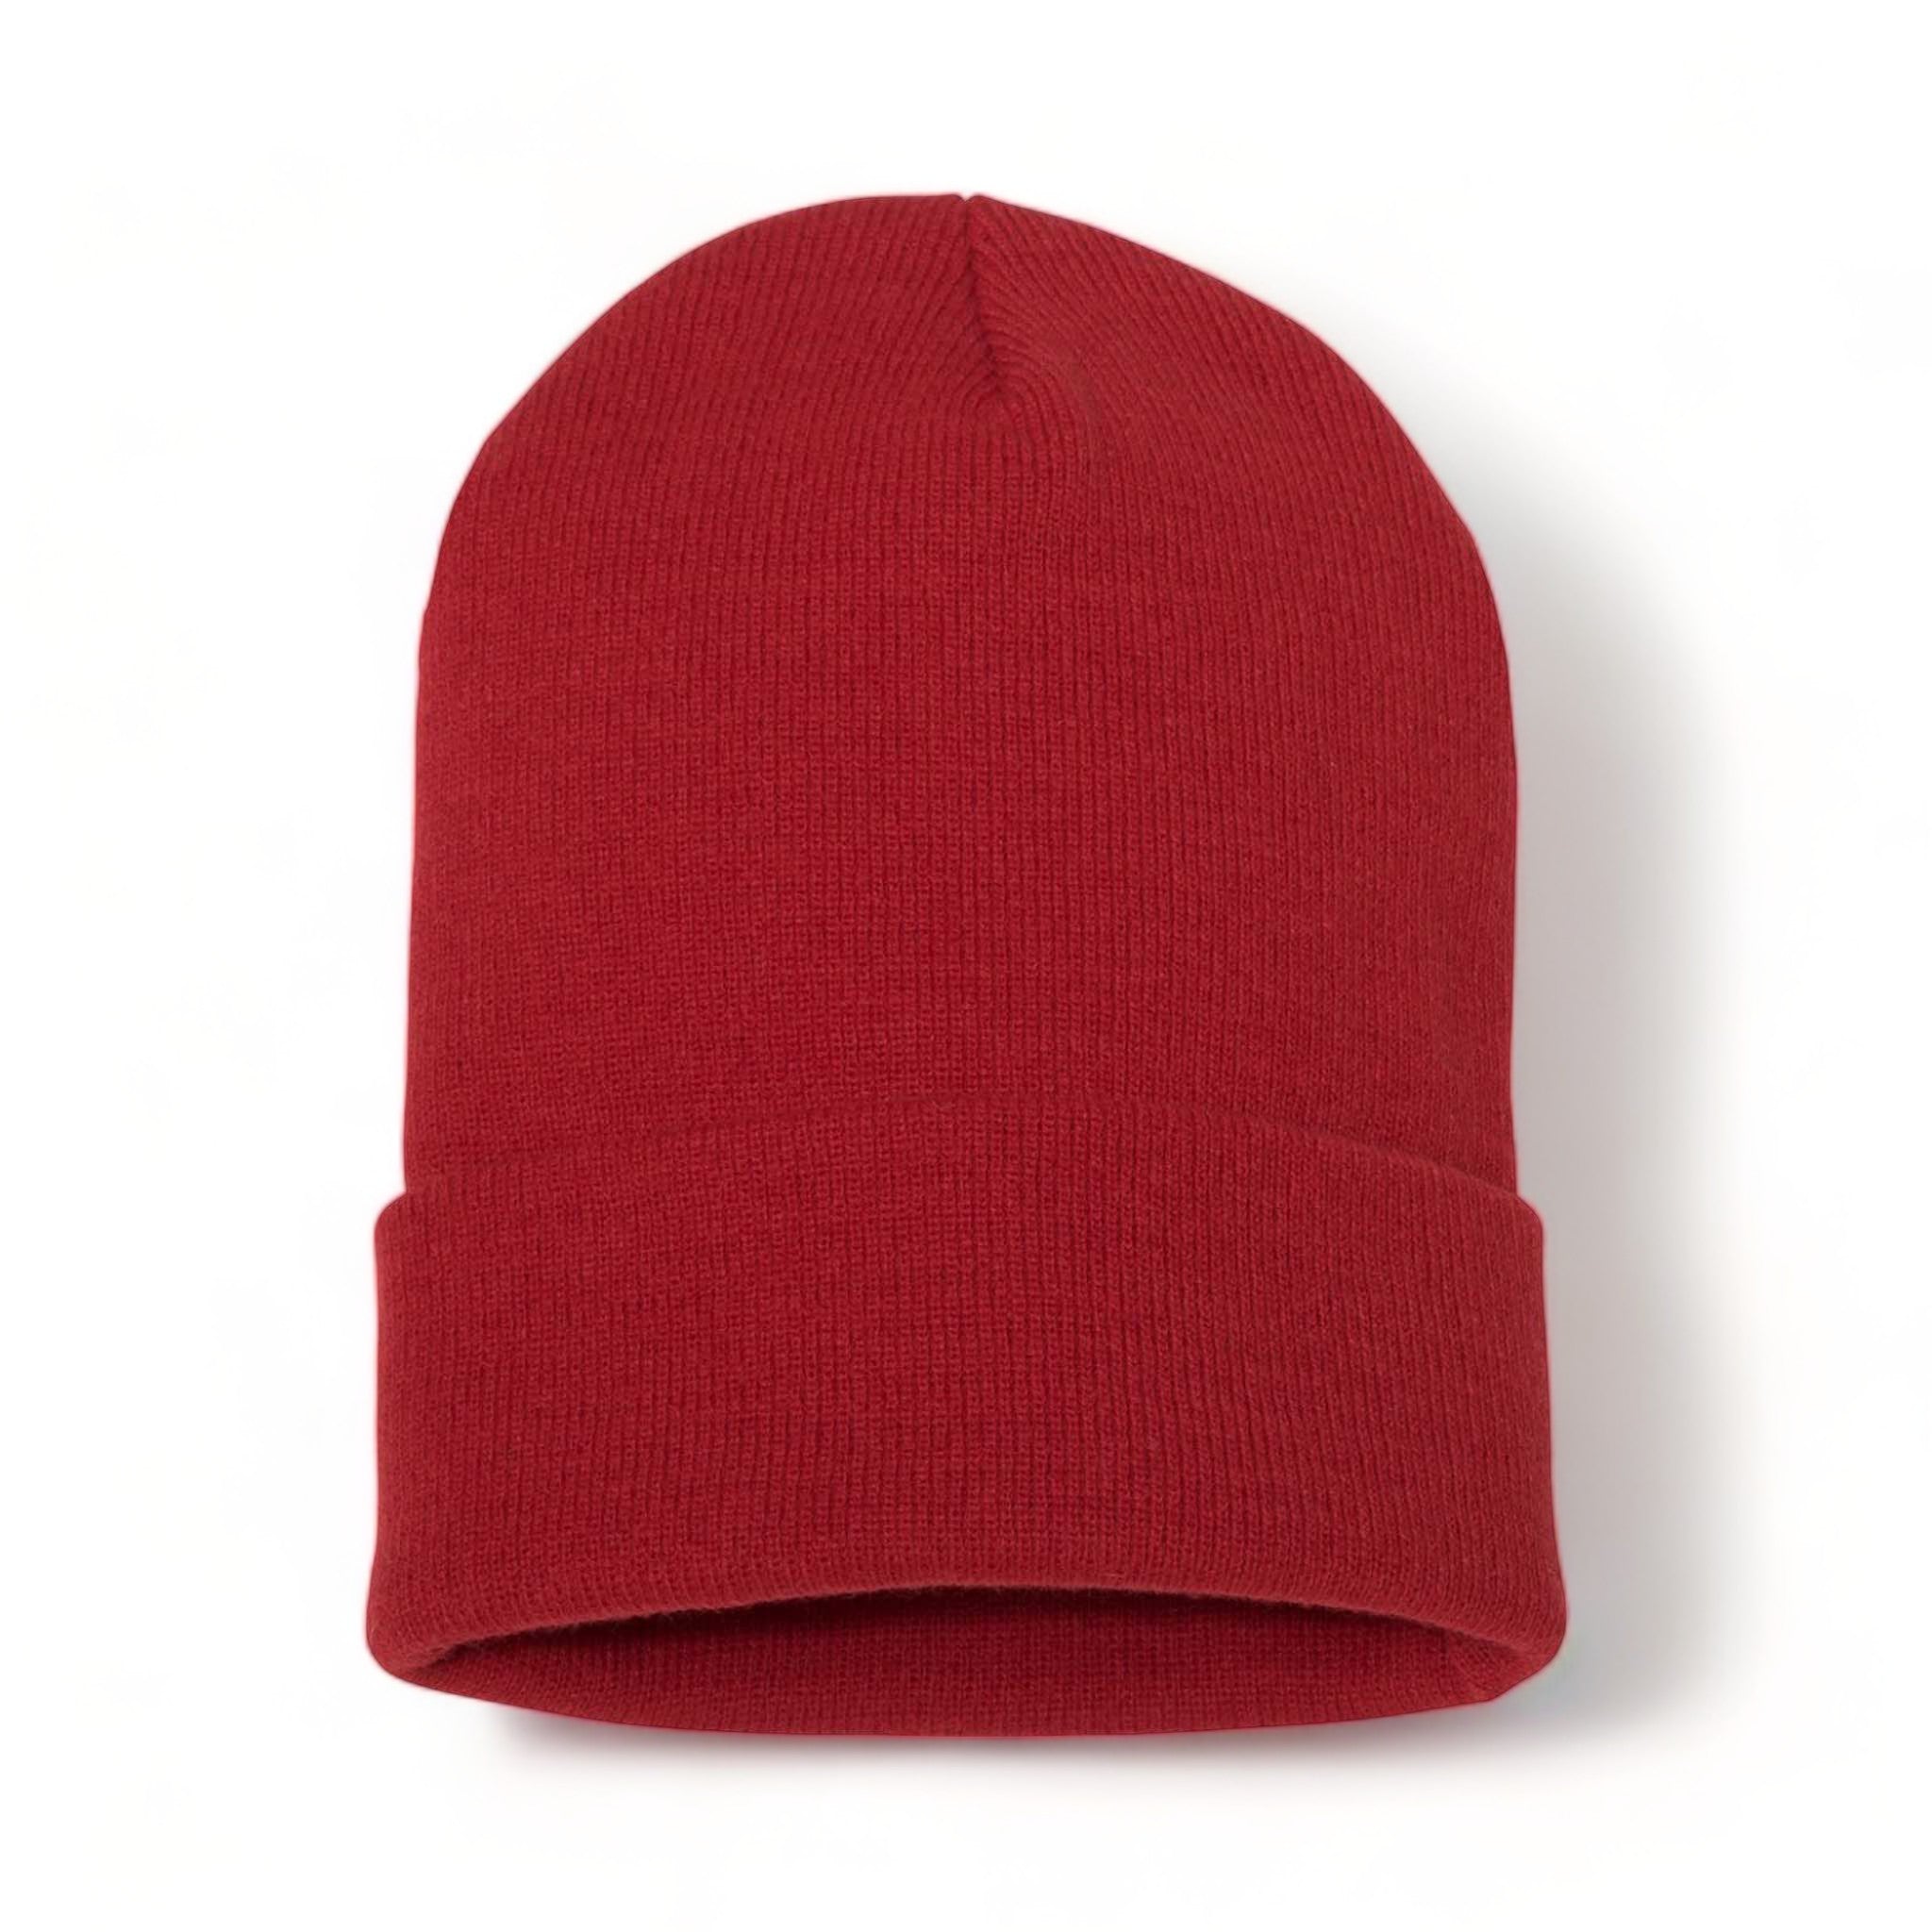 YP Classics 1501KC custom beanie in red